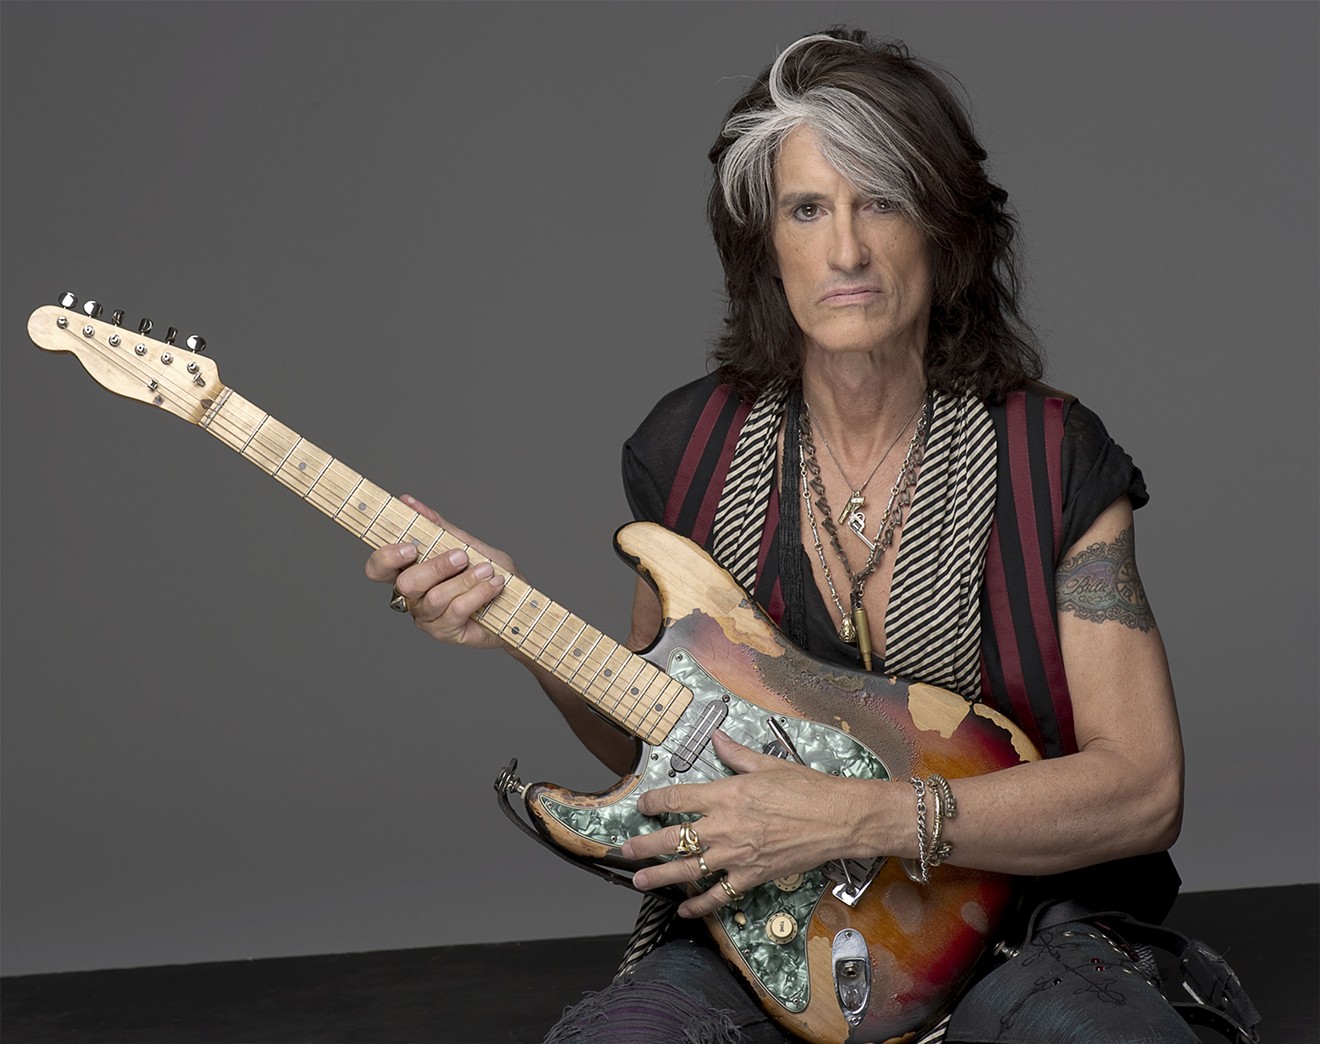 Wanna jam with Aerosmith's Joe Perry? Your chance is coming... this November in South Florida.